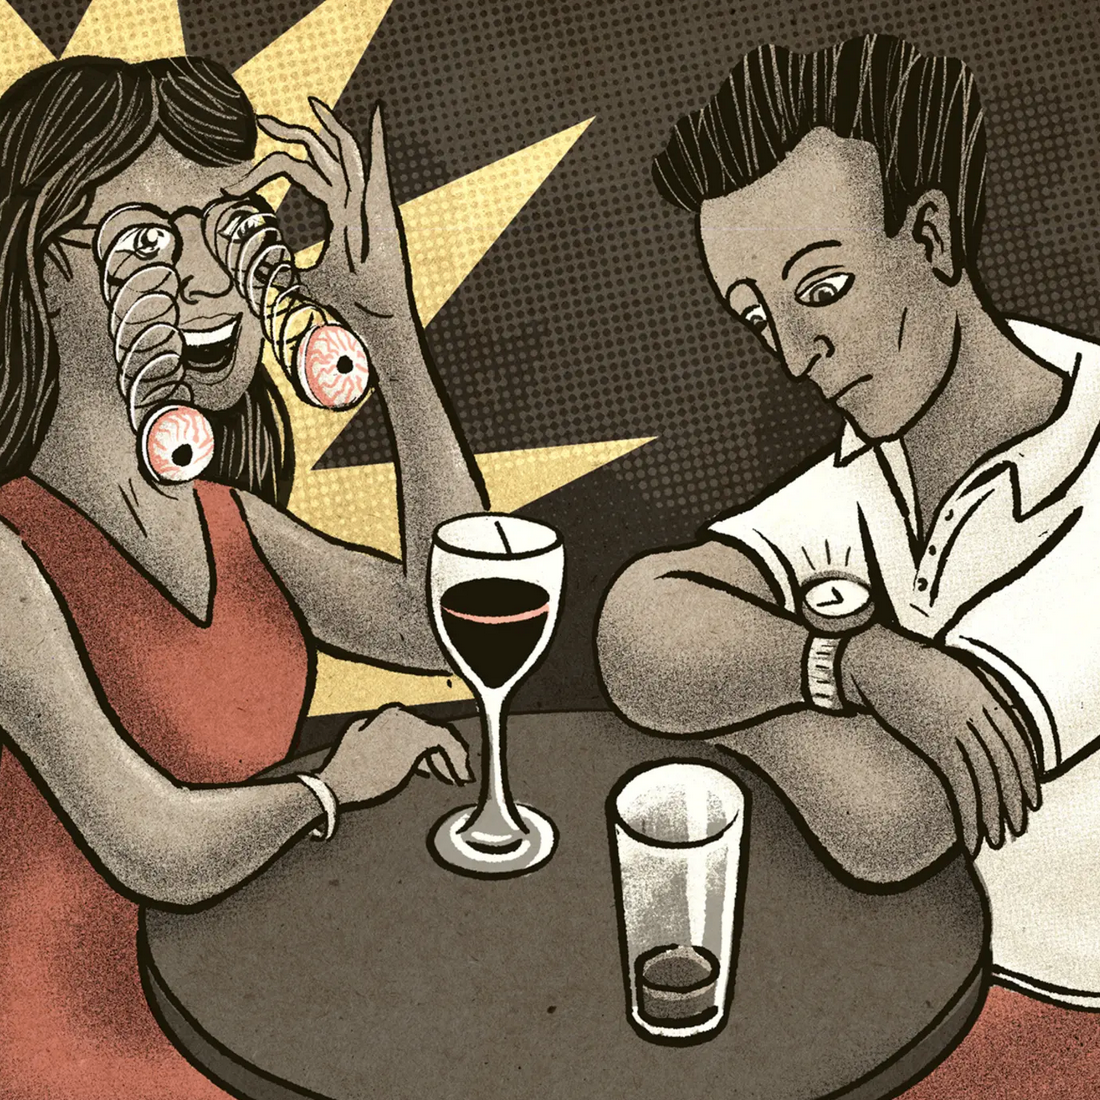 Man and woman in bar, woman has glasses with popping eyeballs